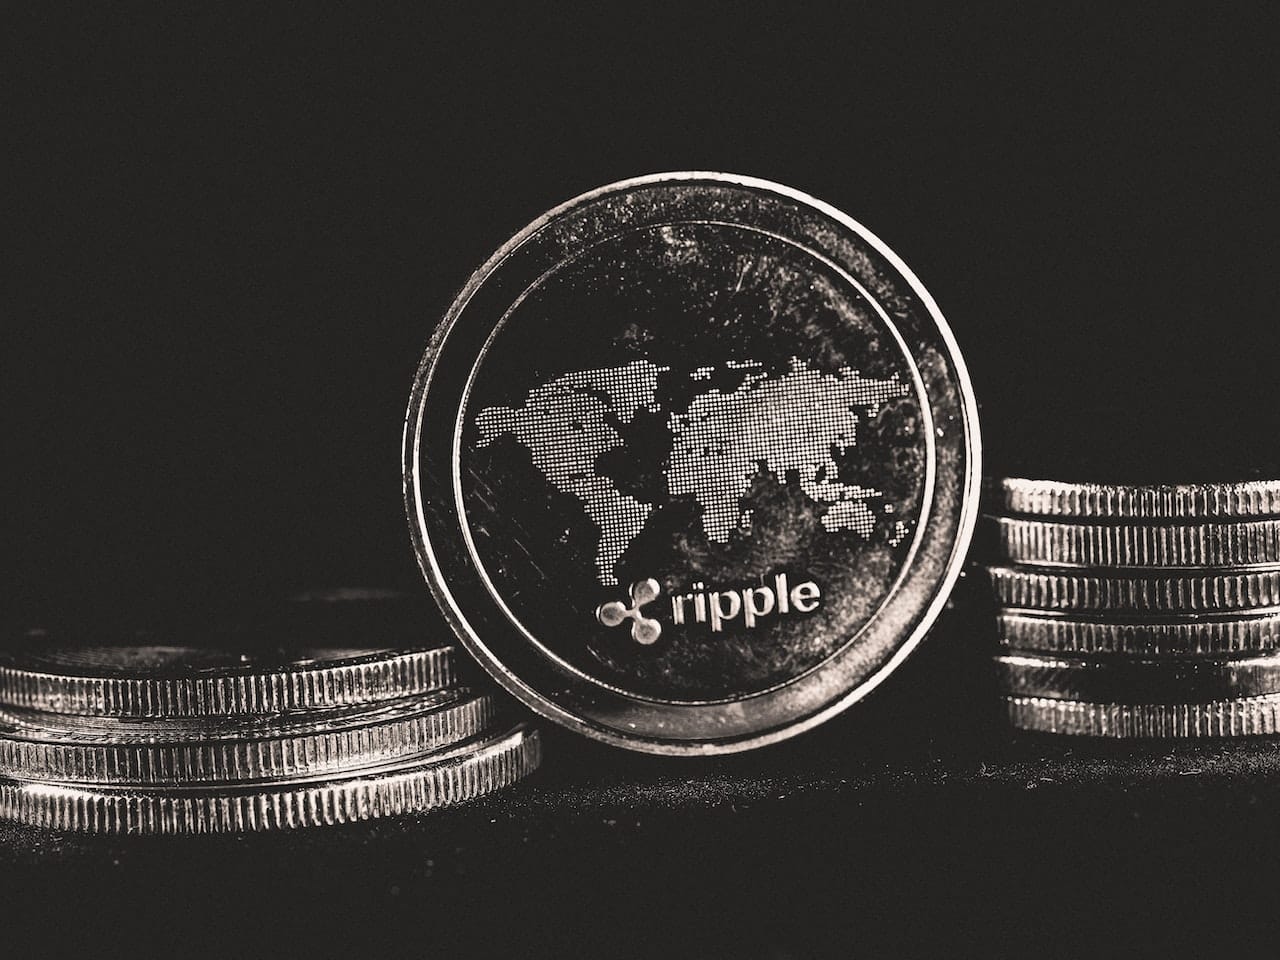 Goldman Sachs: Why Ripple (XRP) Will Outperform Tech Stocks Such as Apple, Microsoft, and Amazon